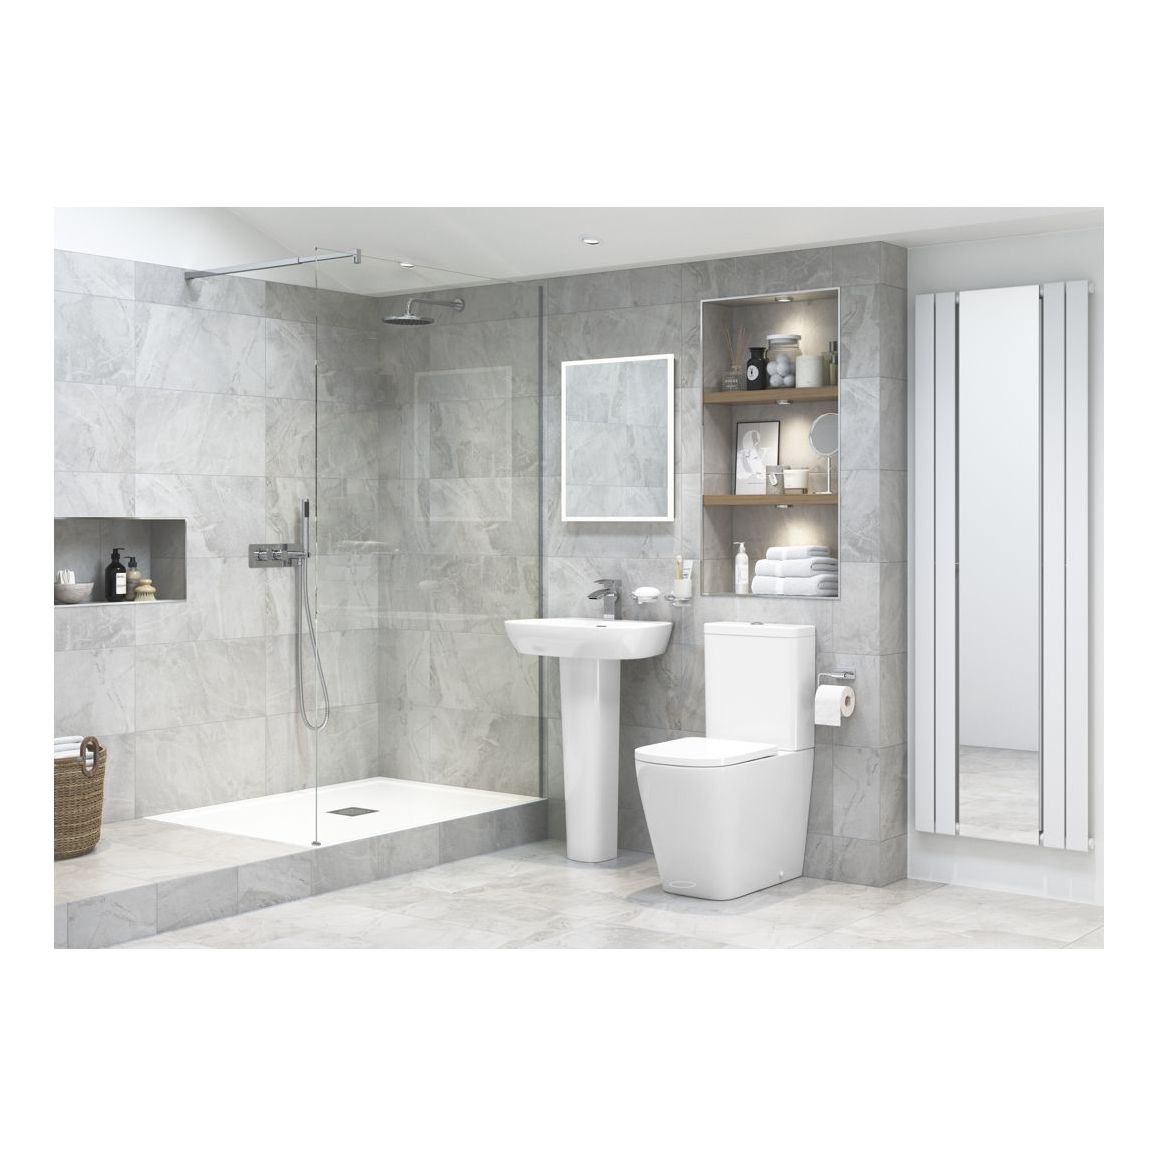 Henshaw Rimless Close Coupled Fully Shrouded Short Projection WC & Soft Close Seat